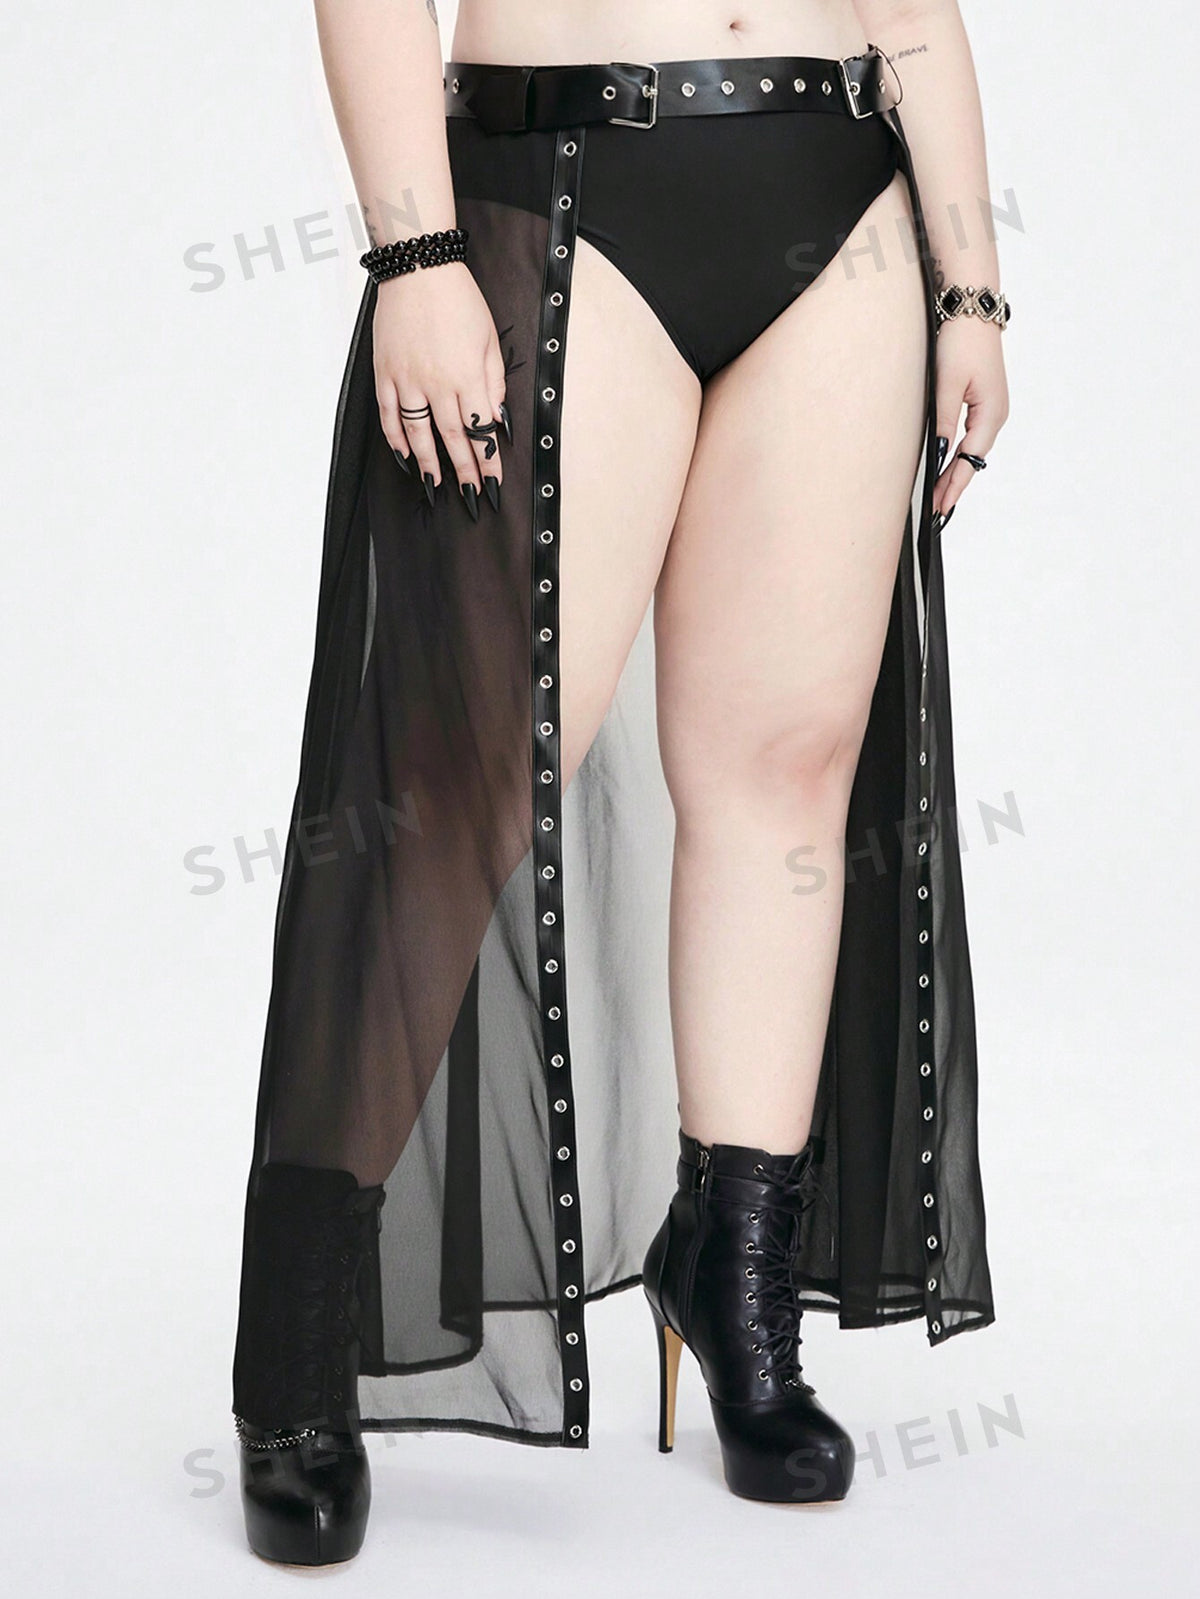 ROMWE Goth Adjustable Gothic Waist Belt With Eyelet Jacquard Fabric Patchwork Skirt Overlay, Plus Size, Perfect For Layering